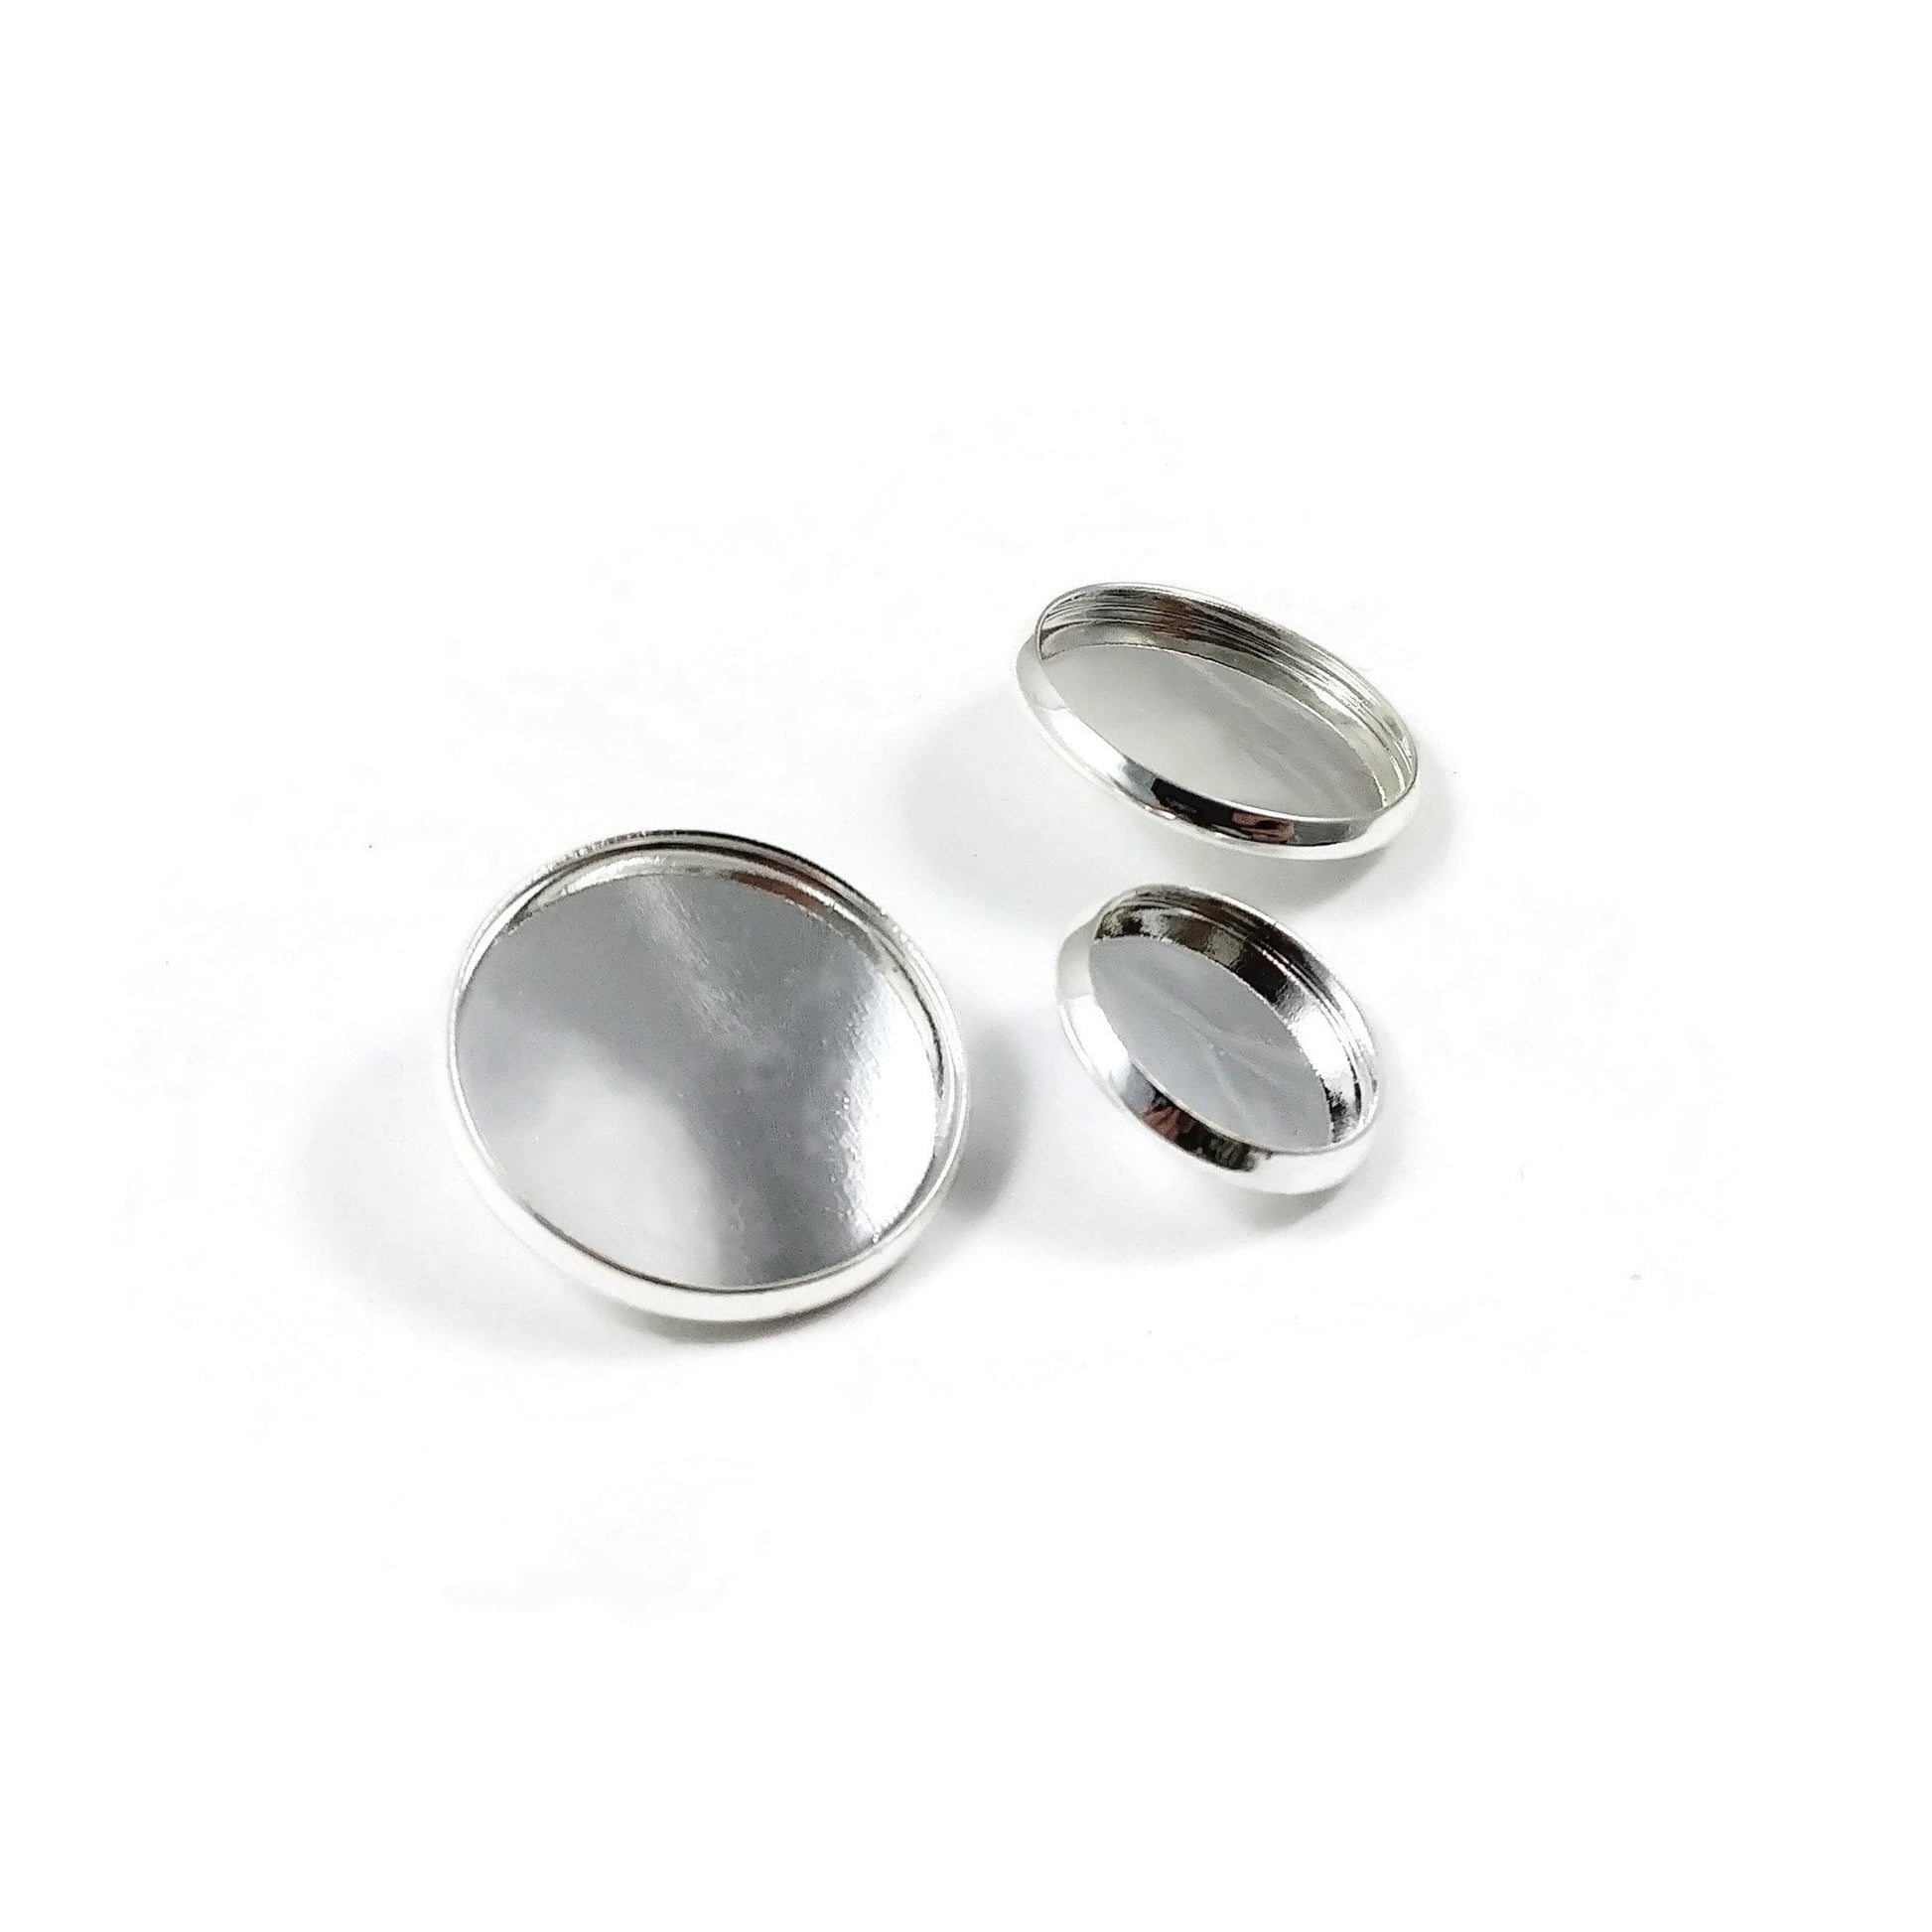 Silver shank button settings - Make you own buttons - Cabochon bezel